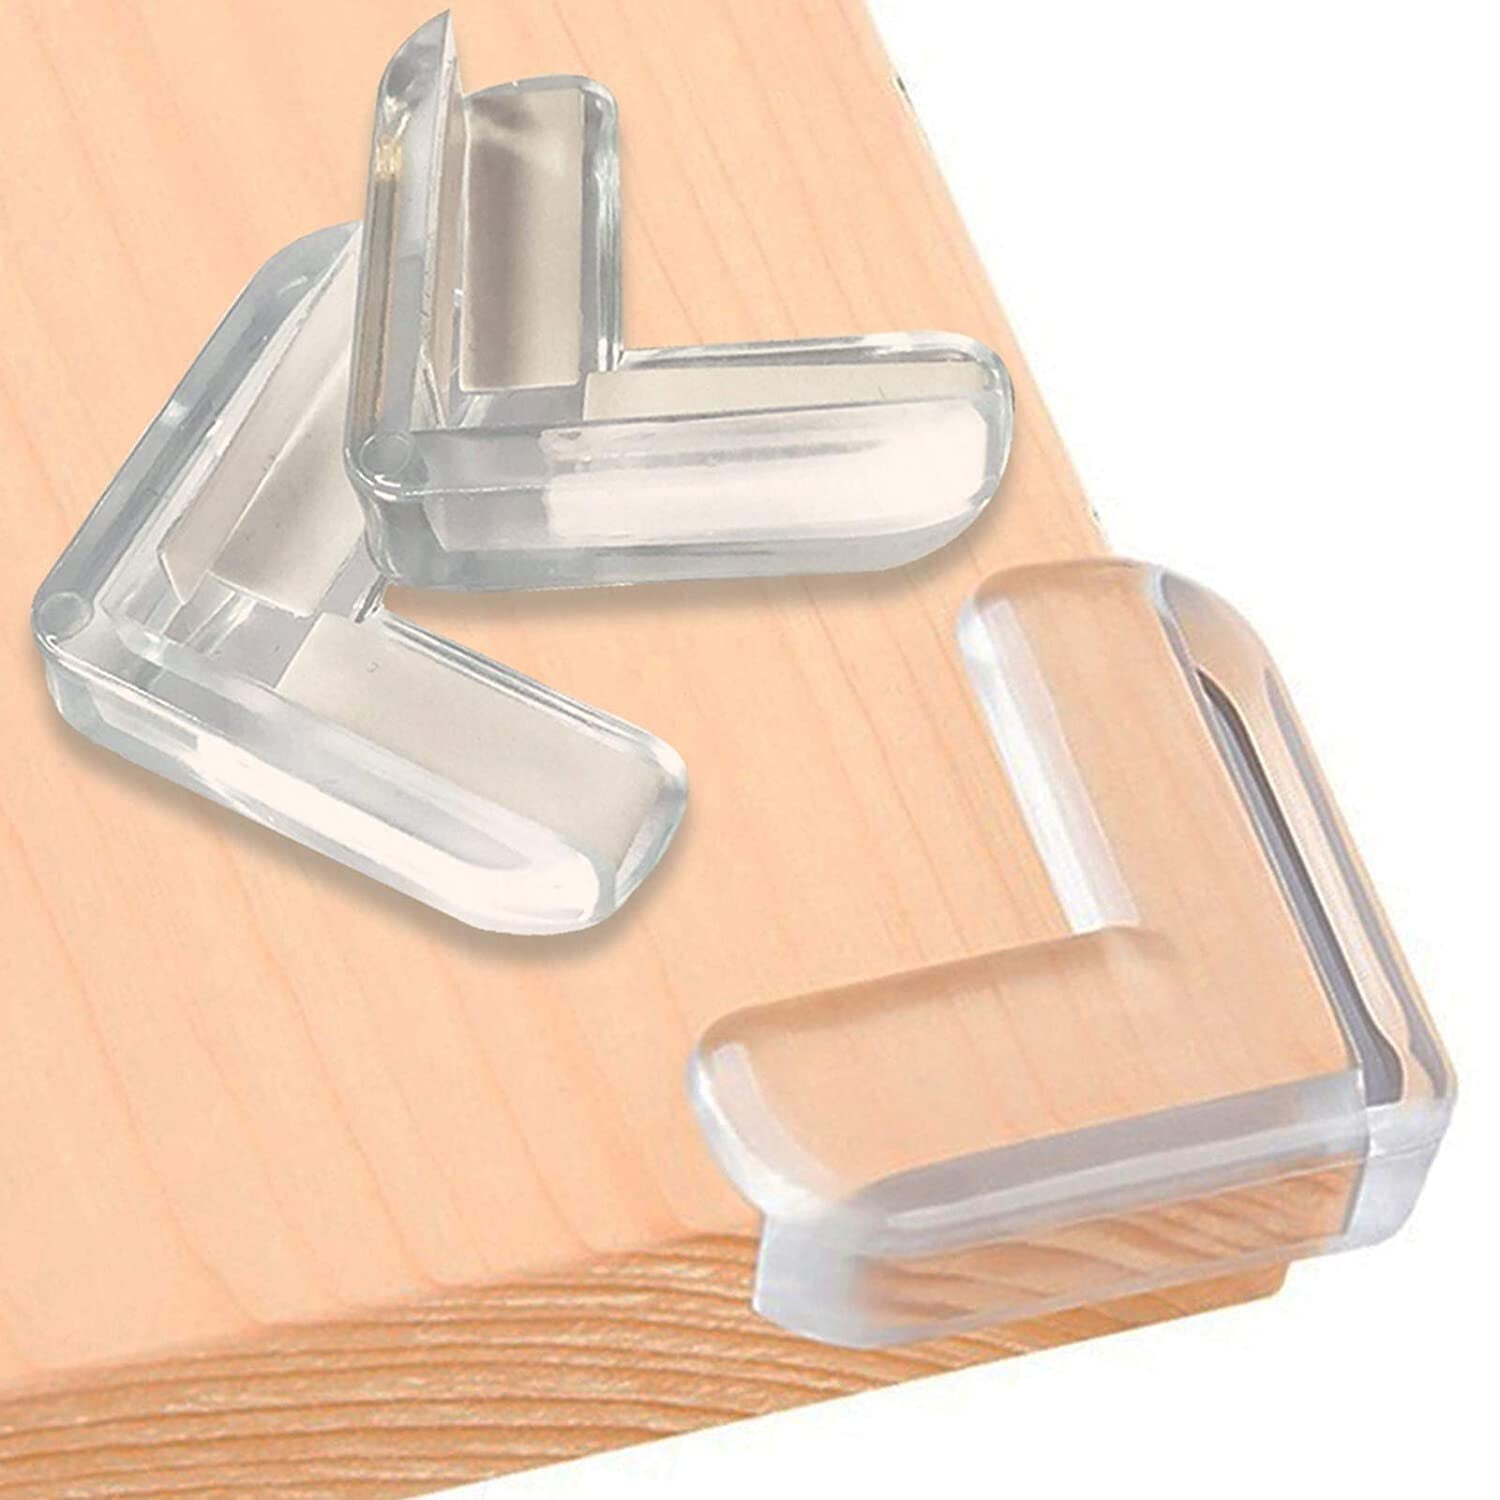 Cushion Glass Desk Table Door Edge Corners Protector Guard For Baby Kids Safety 